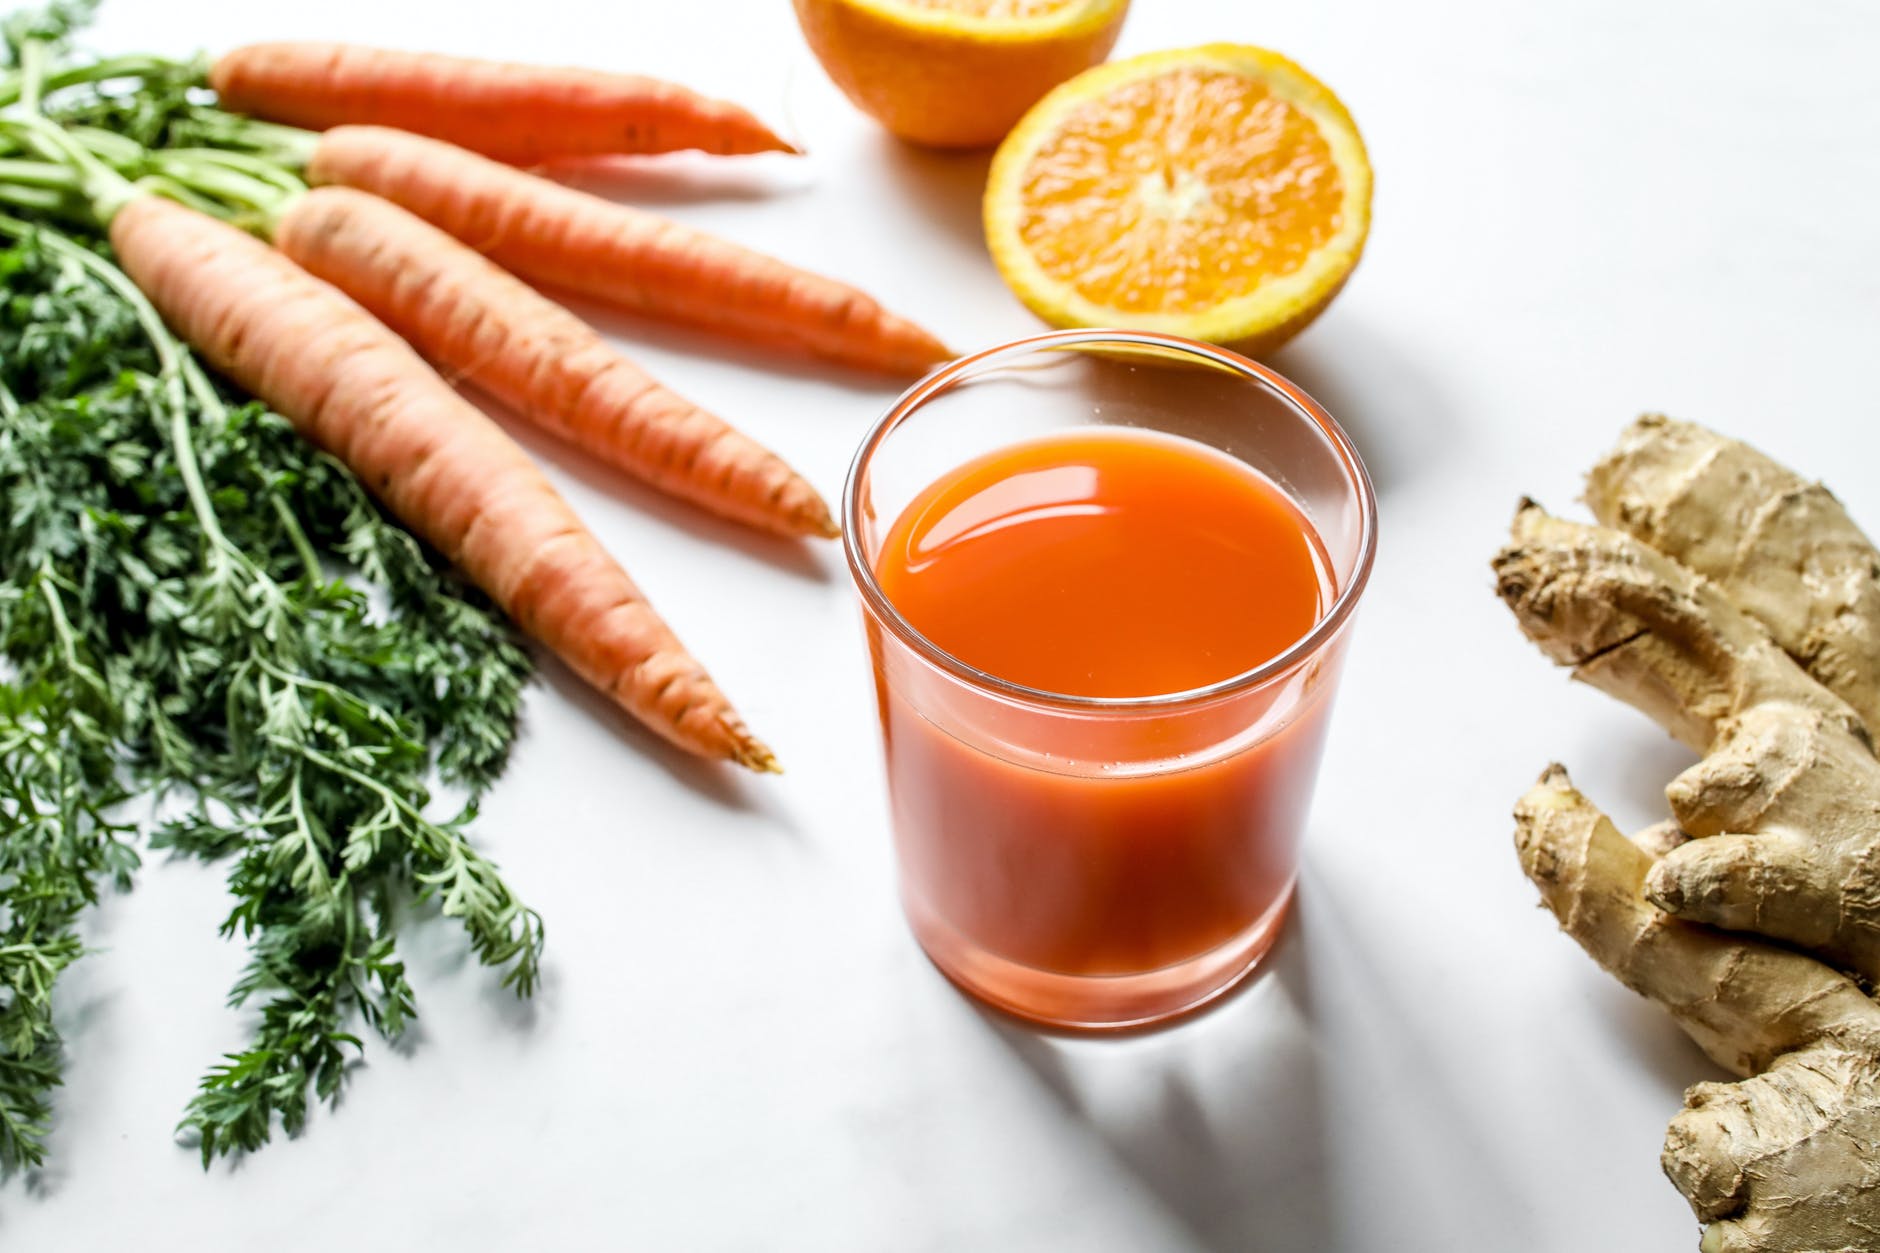 is carrot juice good for you?